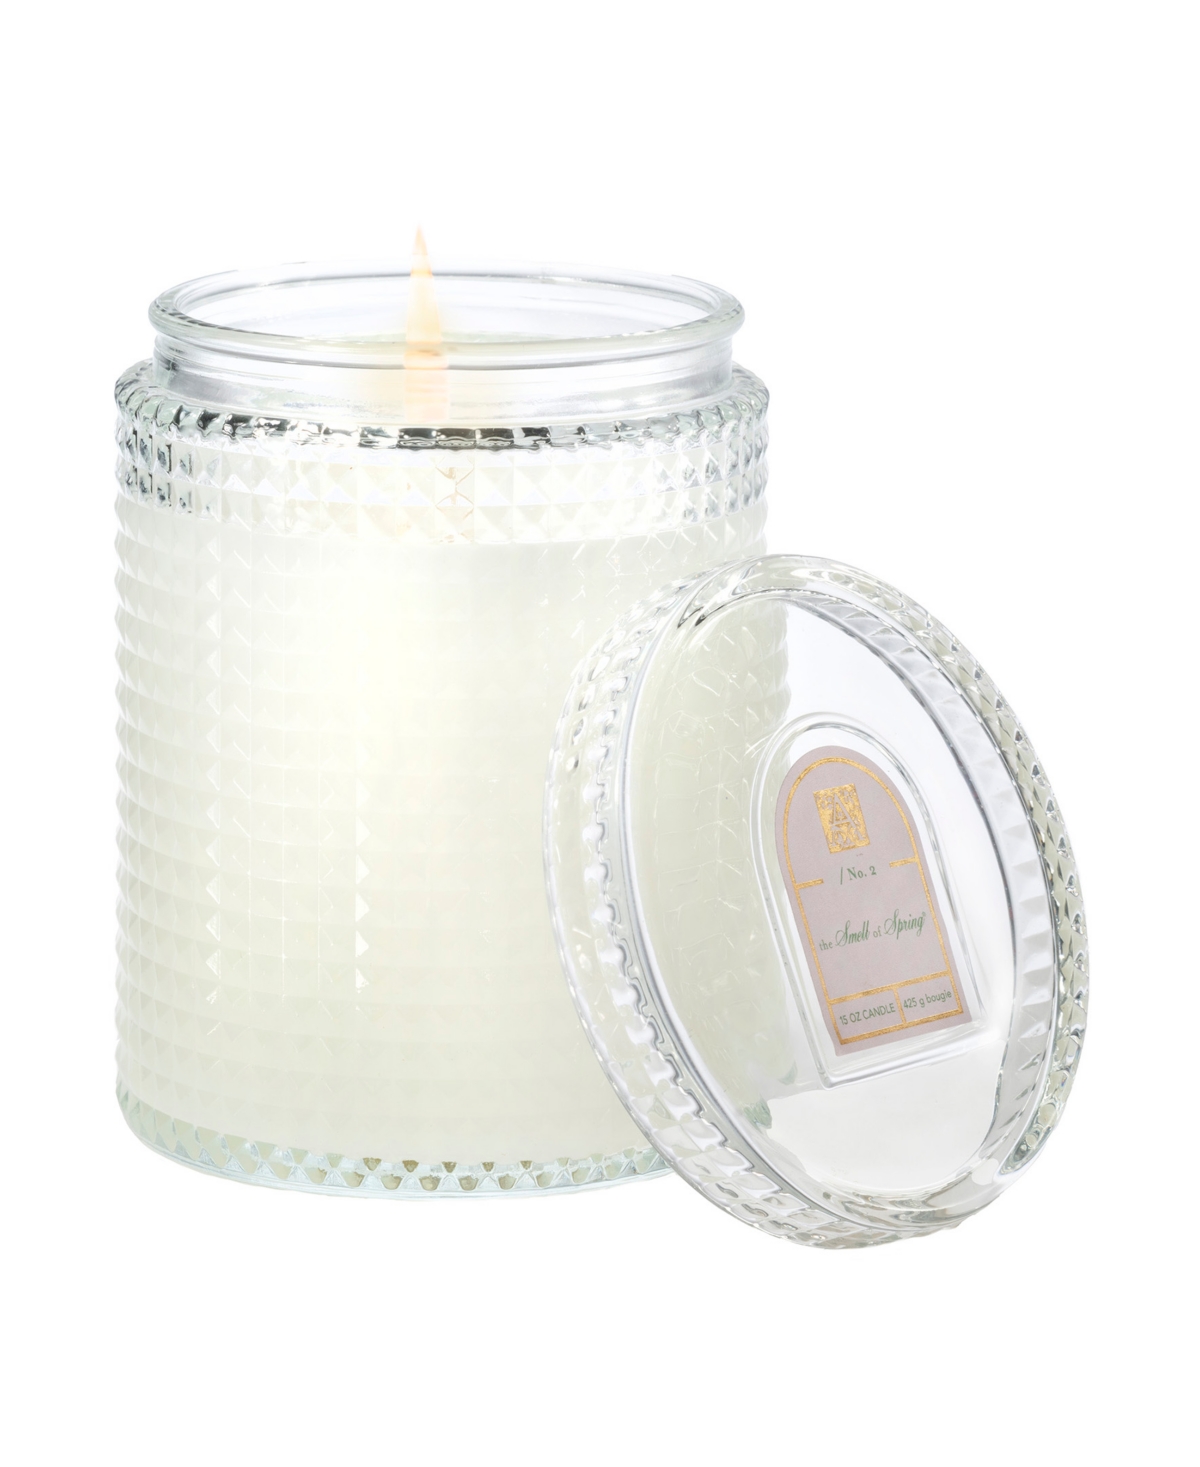 The Smell of Spring Textured Glass Candle, 15 oz - White